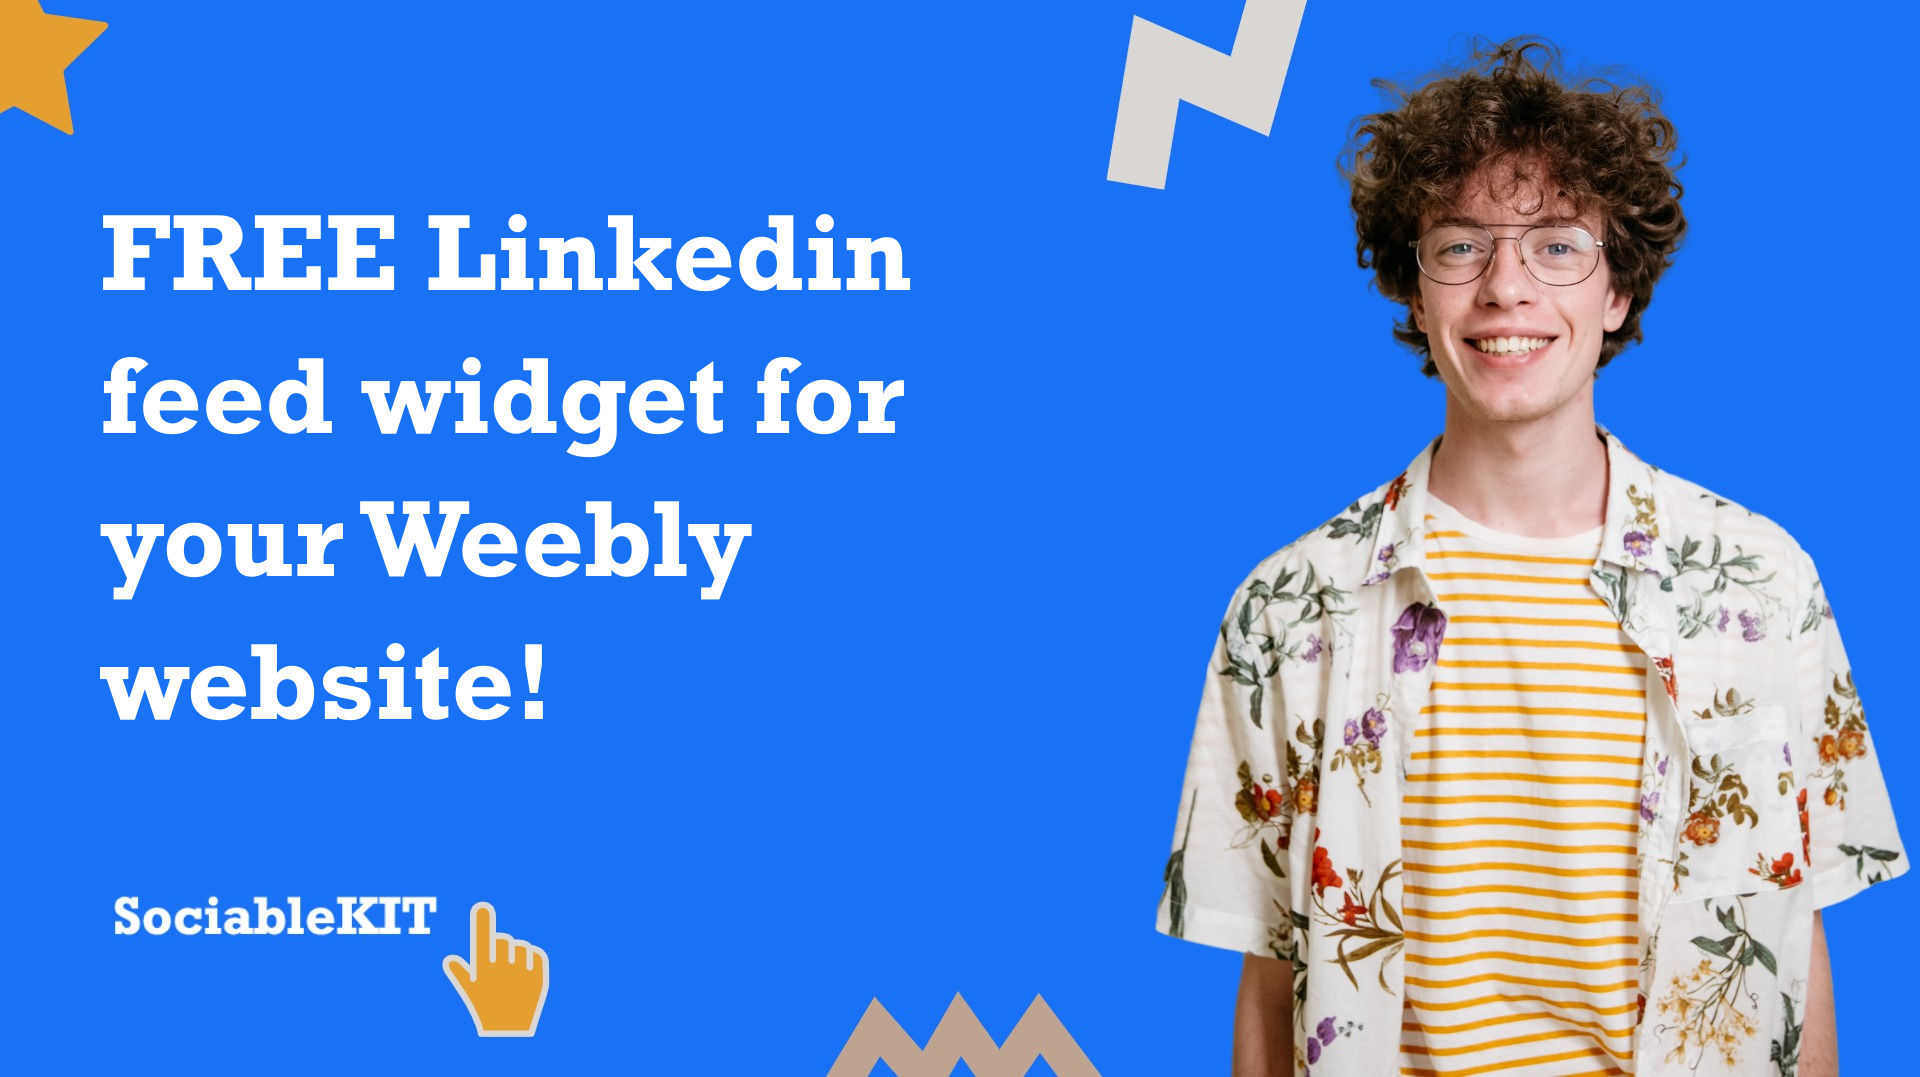 Free Linkedin feed widget for your Weebly website